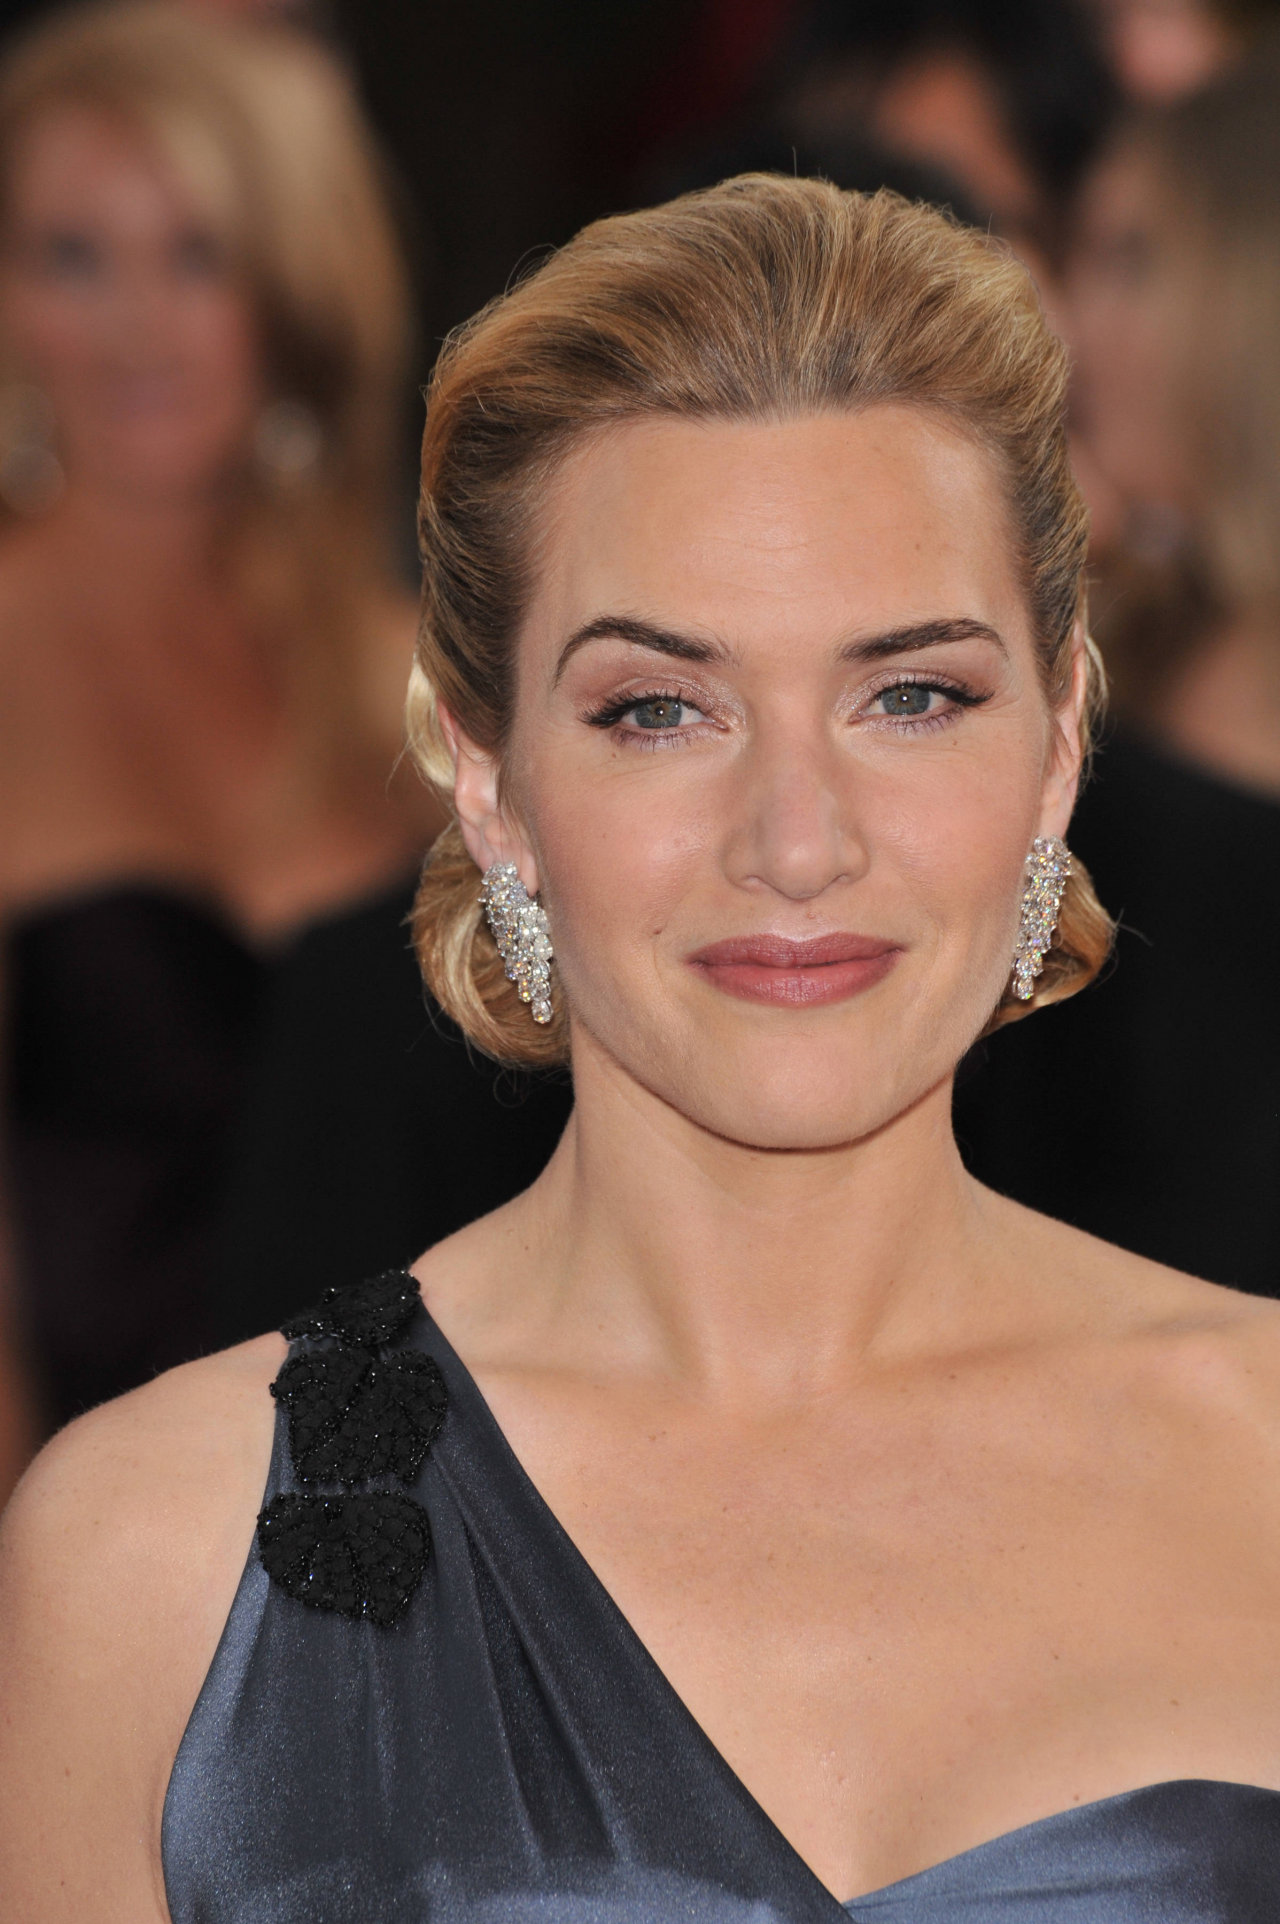 Kate Winslet leaked wallpapers